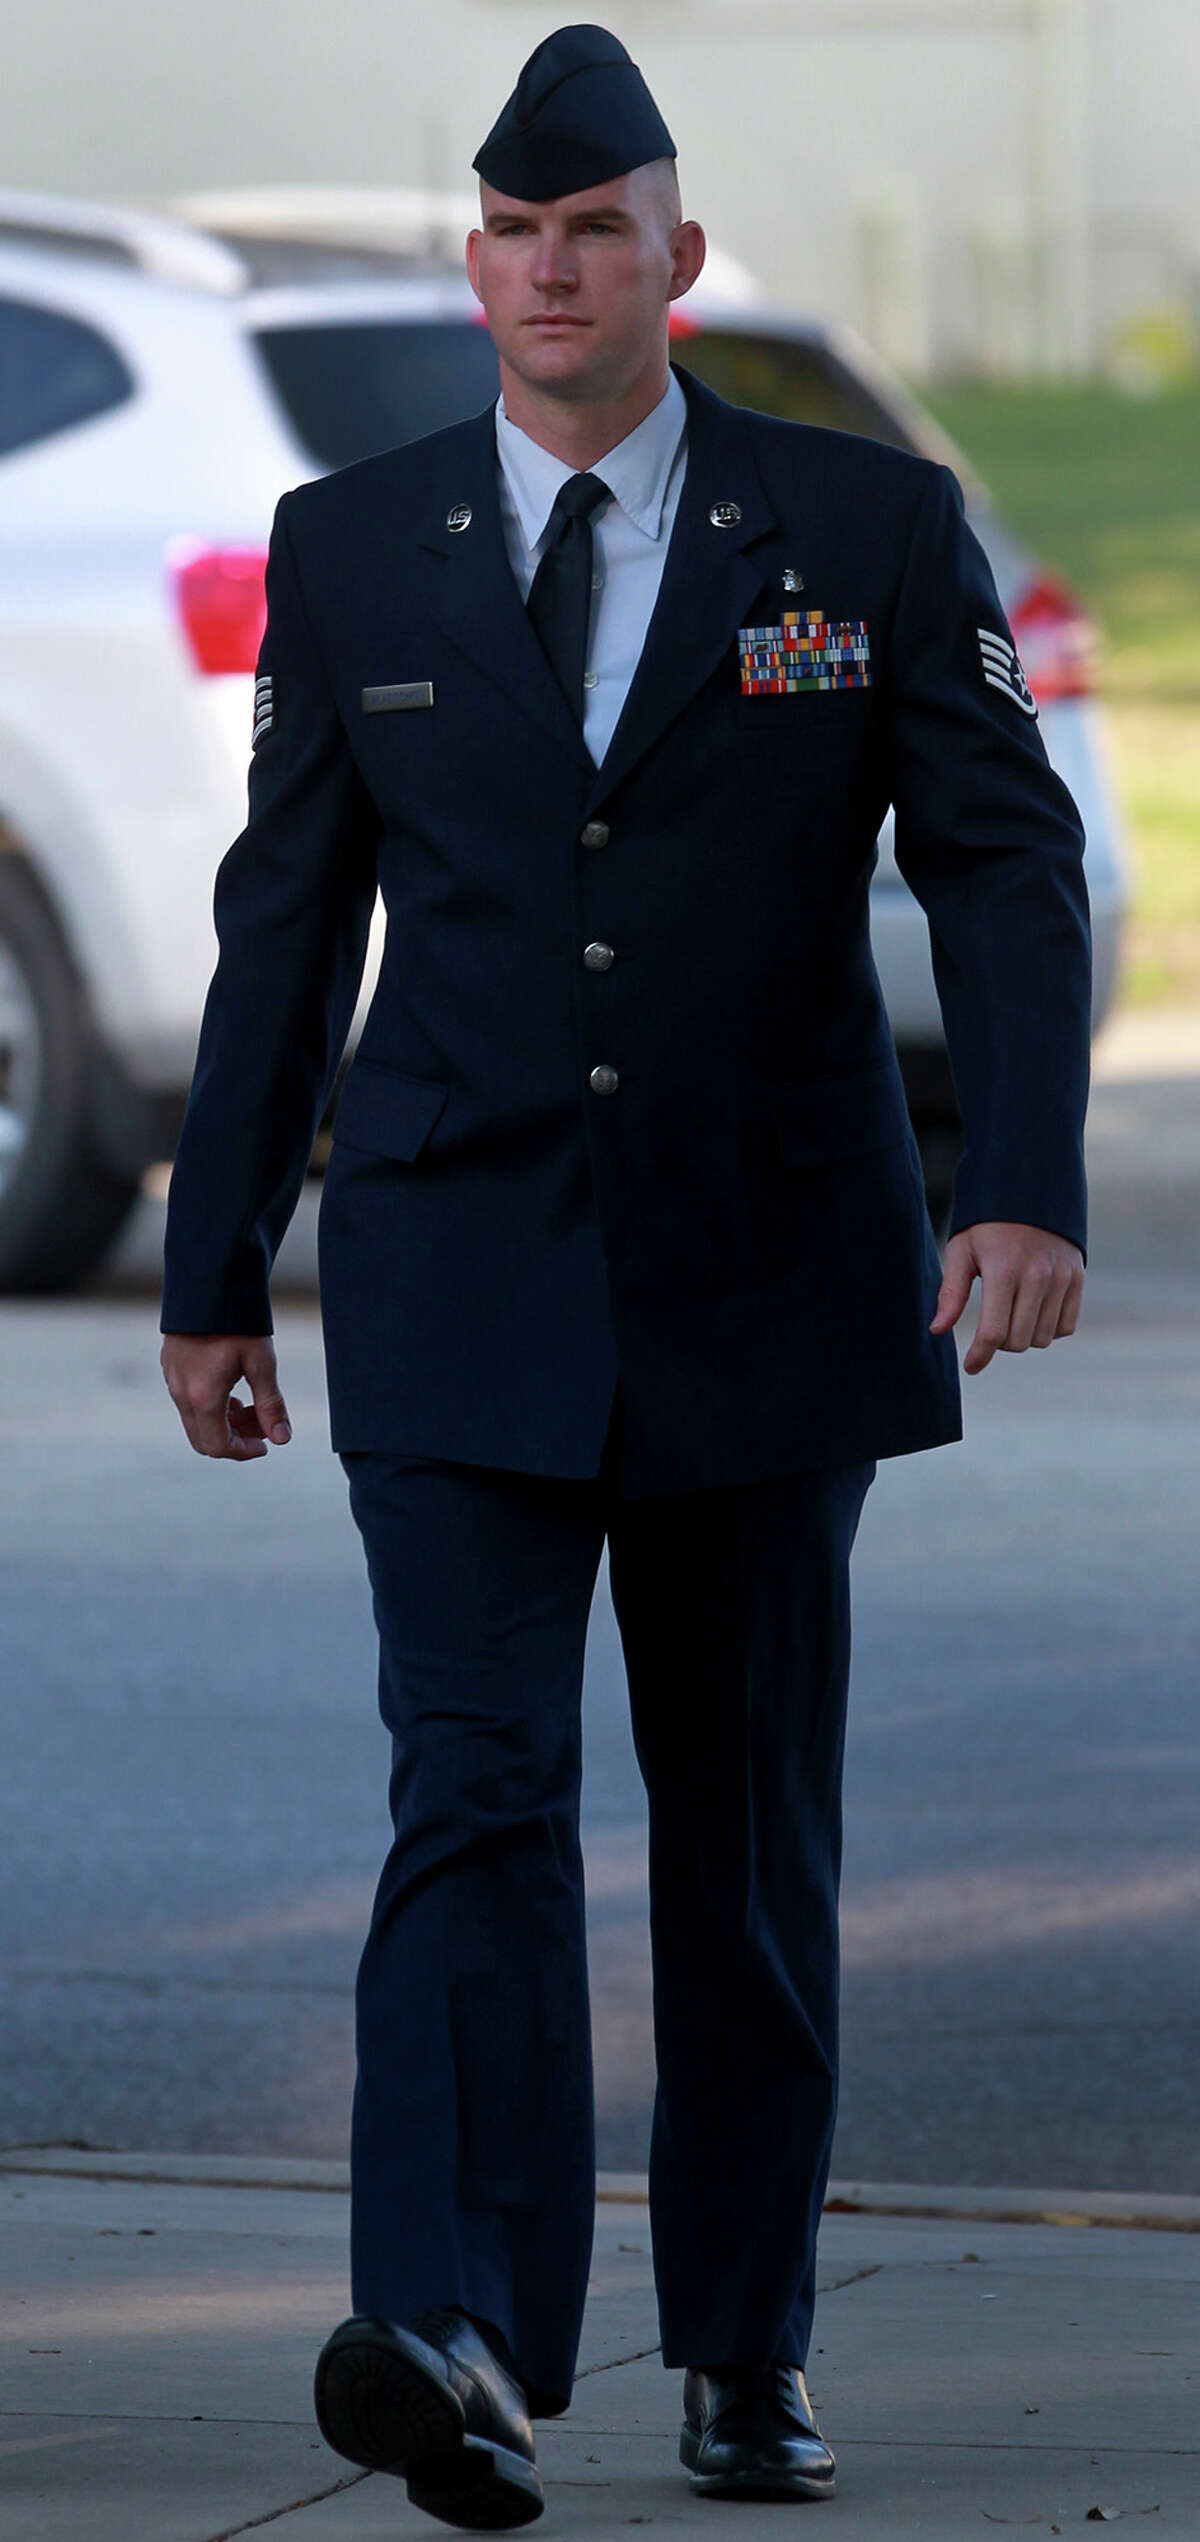 Basic training instructor Michael Wladischkin walks to a hearing at Joint Base San Antonio-Randolph Wednesday May 22, 2013. Wladischkin faces an Article 32 evidentiary hearing on allegations of indecent acts, adultery, and unprofessional relationships with technical training students.